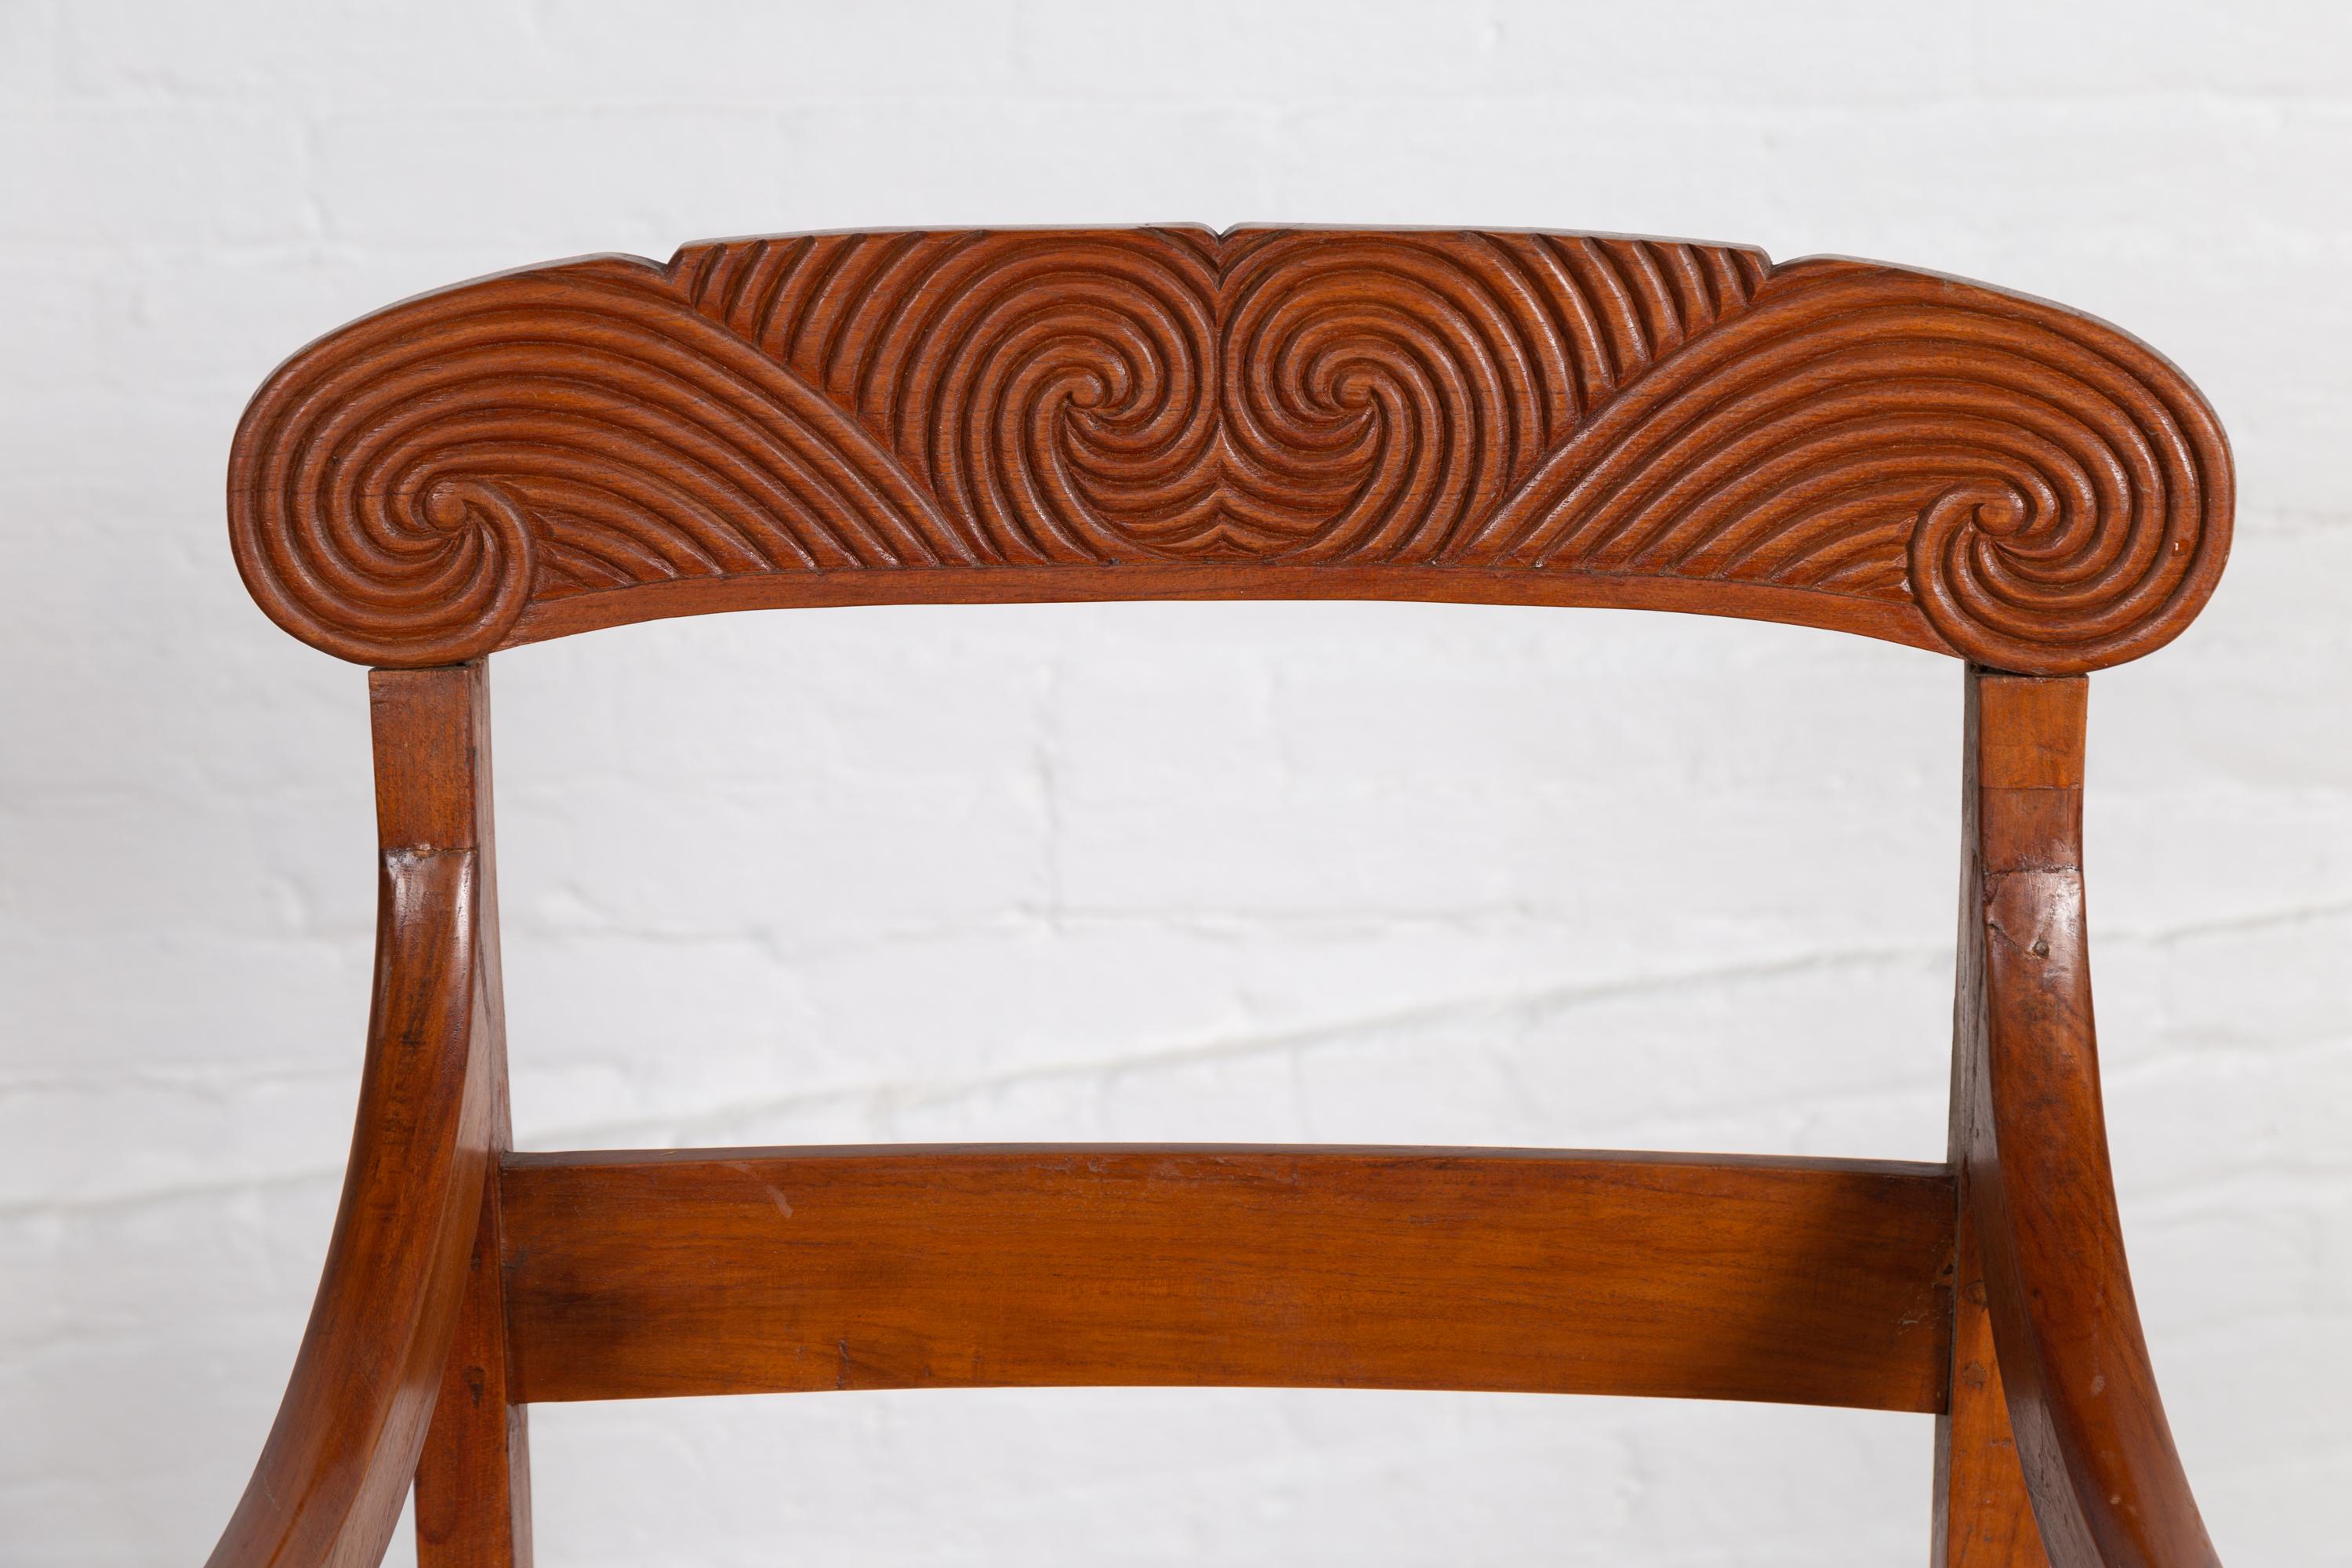 Woven Antique Javanese Wooden Armchair with Carved Back, Curving Arms and Rattan Seat For Sale